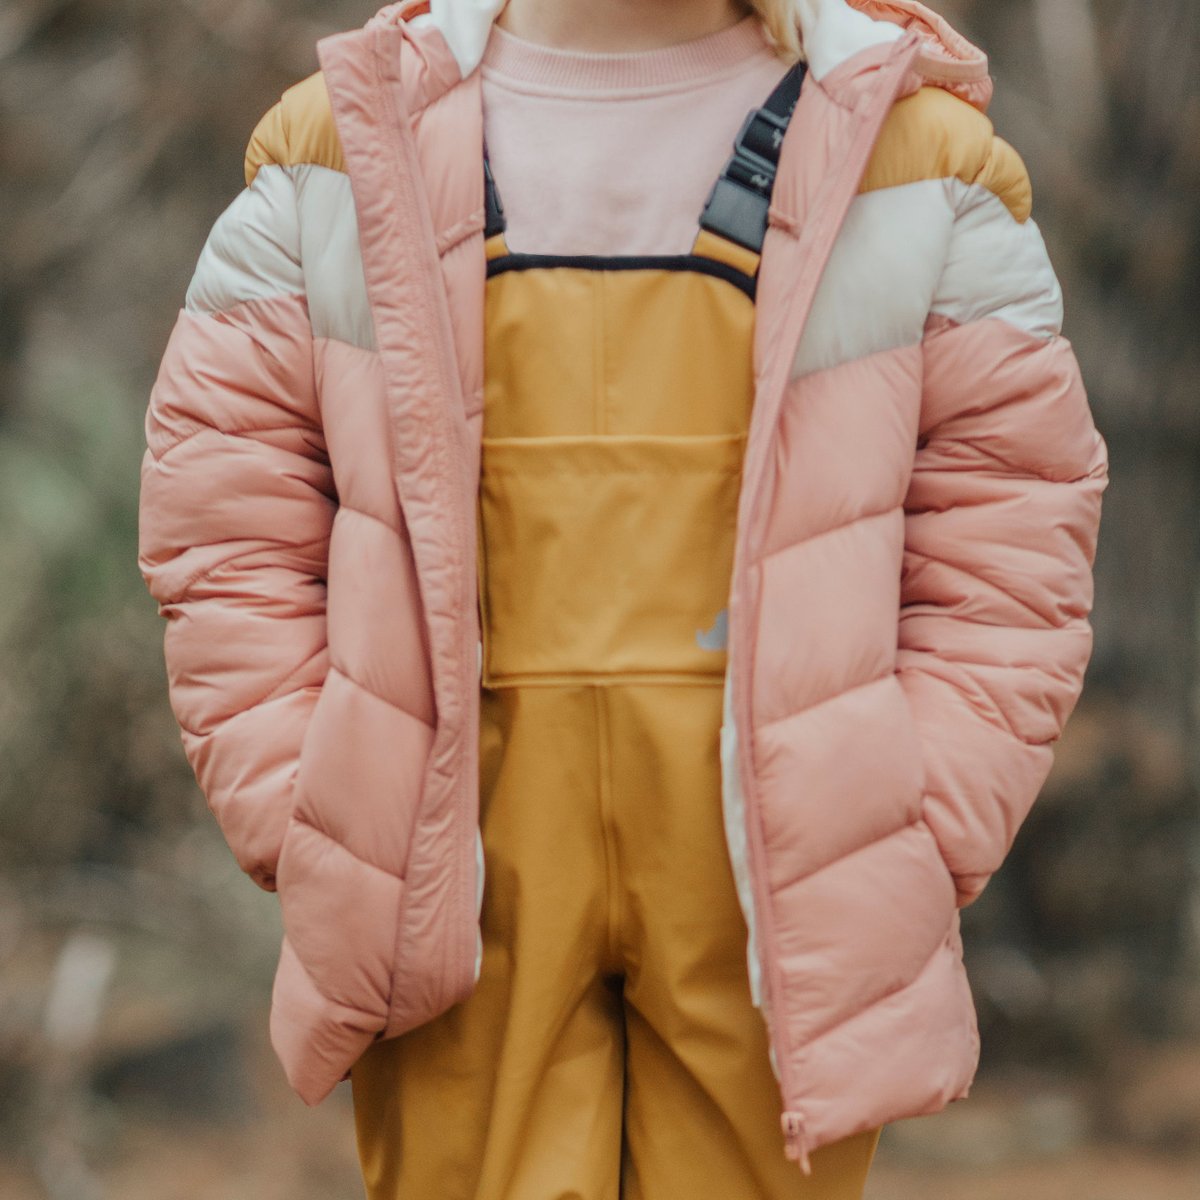 child wearing yellow overalls and pink jacket